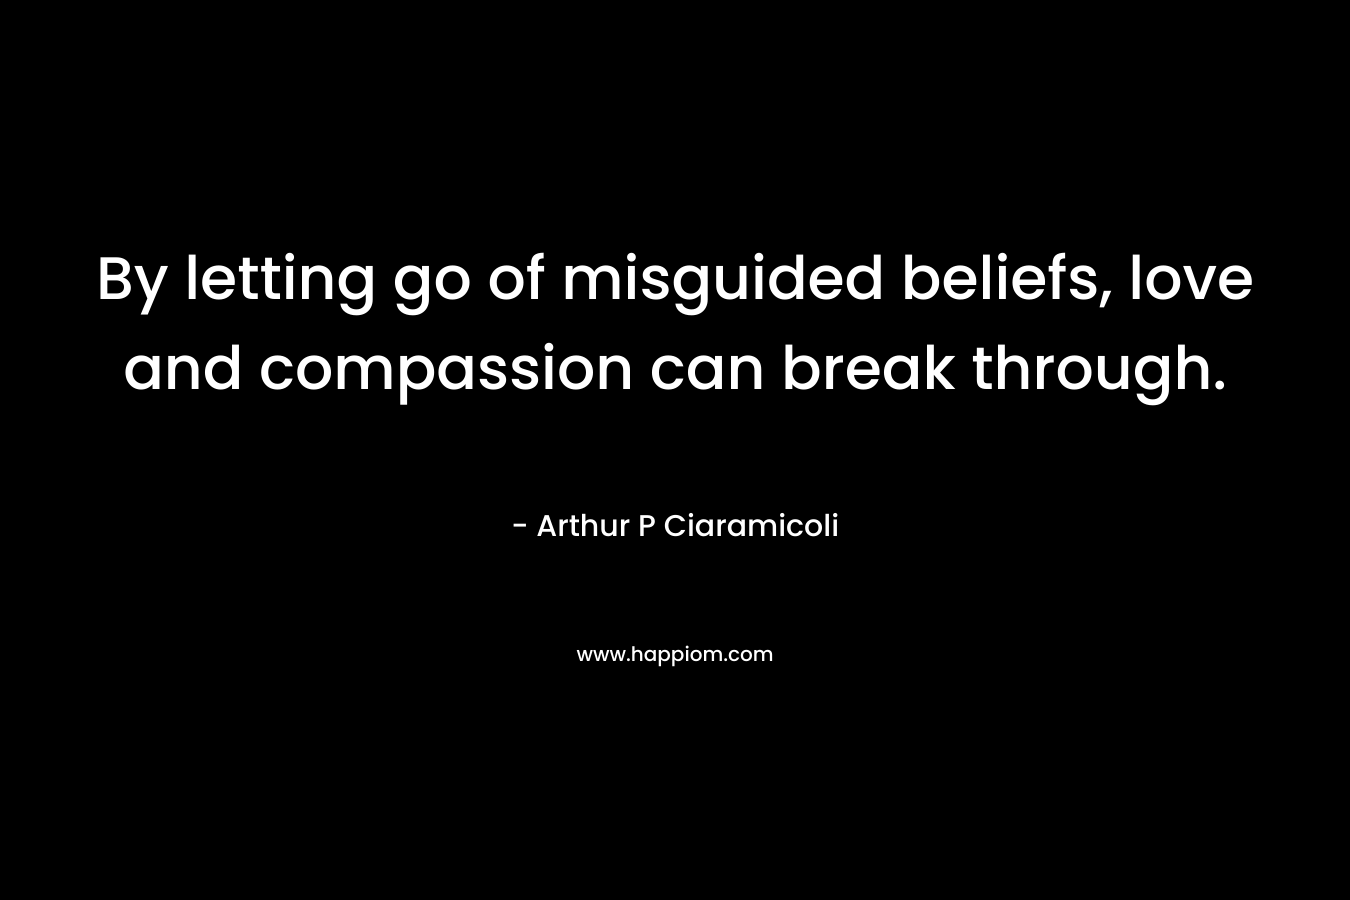 By letting go of misguided beliefs, love and compassion can break through. – Arthur P Ciaramicoli